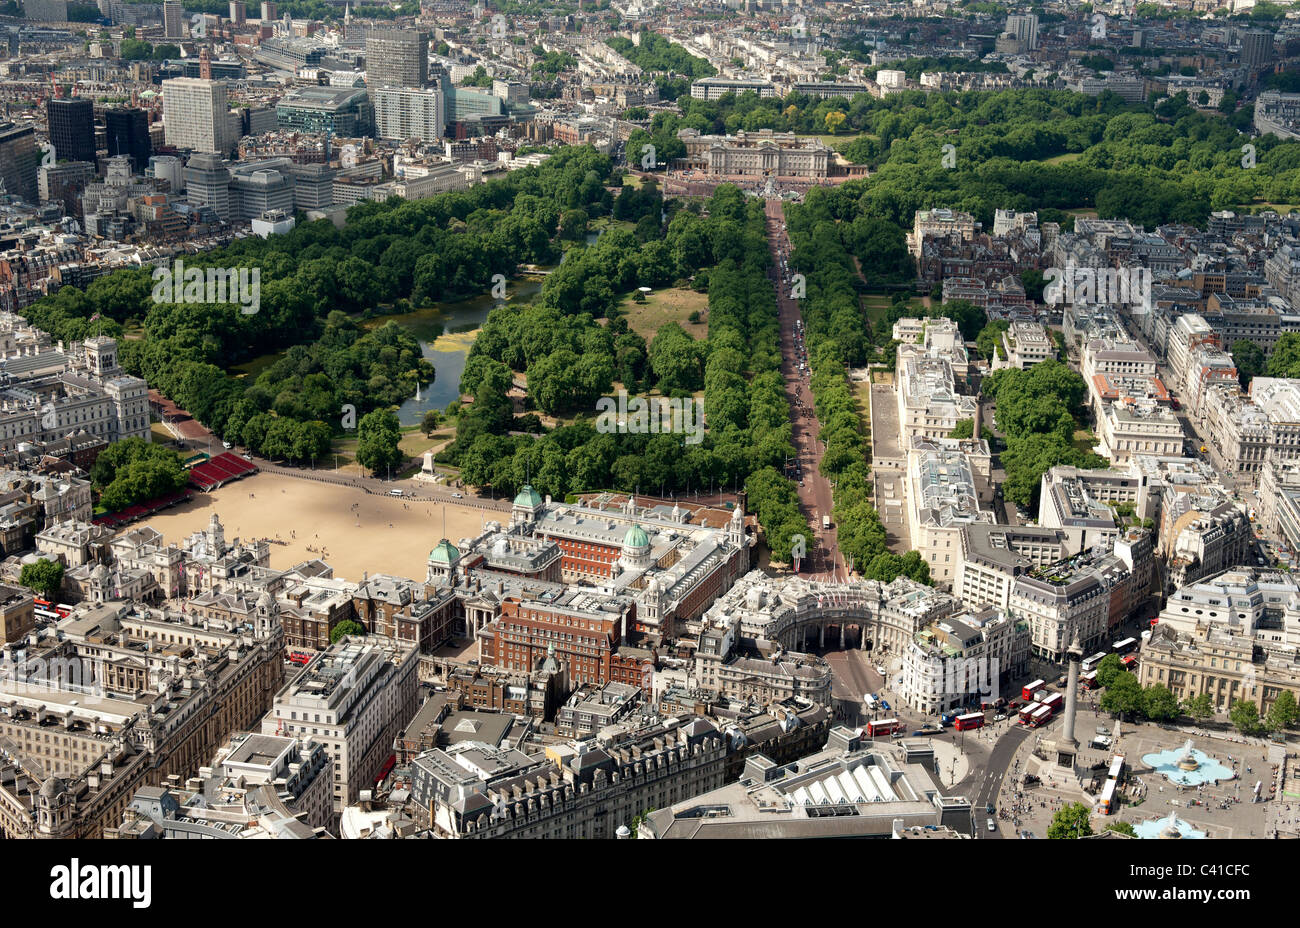 The Mall and St James's Park London from the air Stock Photo